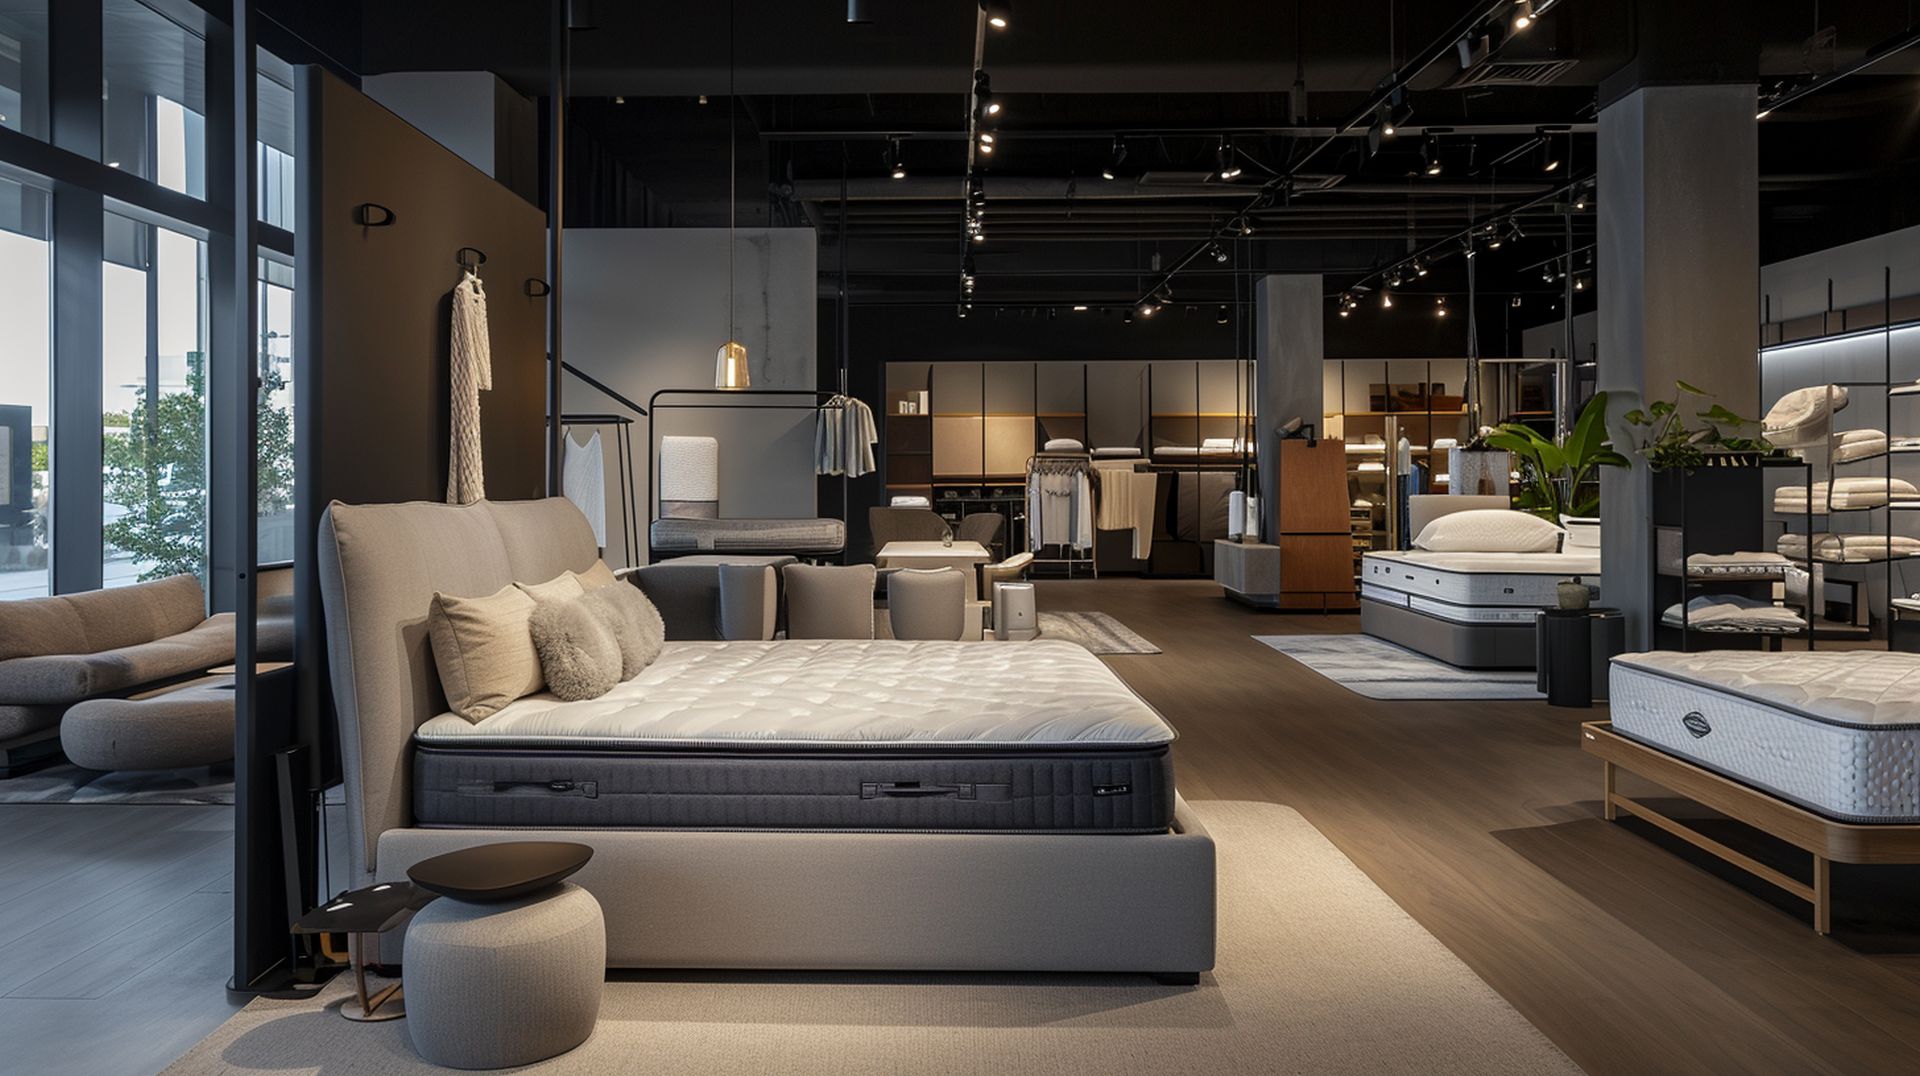 If you're looking for a new bed, mattress stores in Lakewood offer the best customer and delivery service, financing, and warranties in California